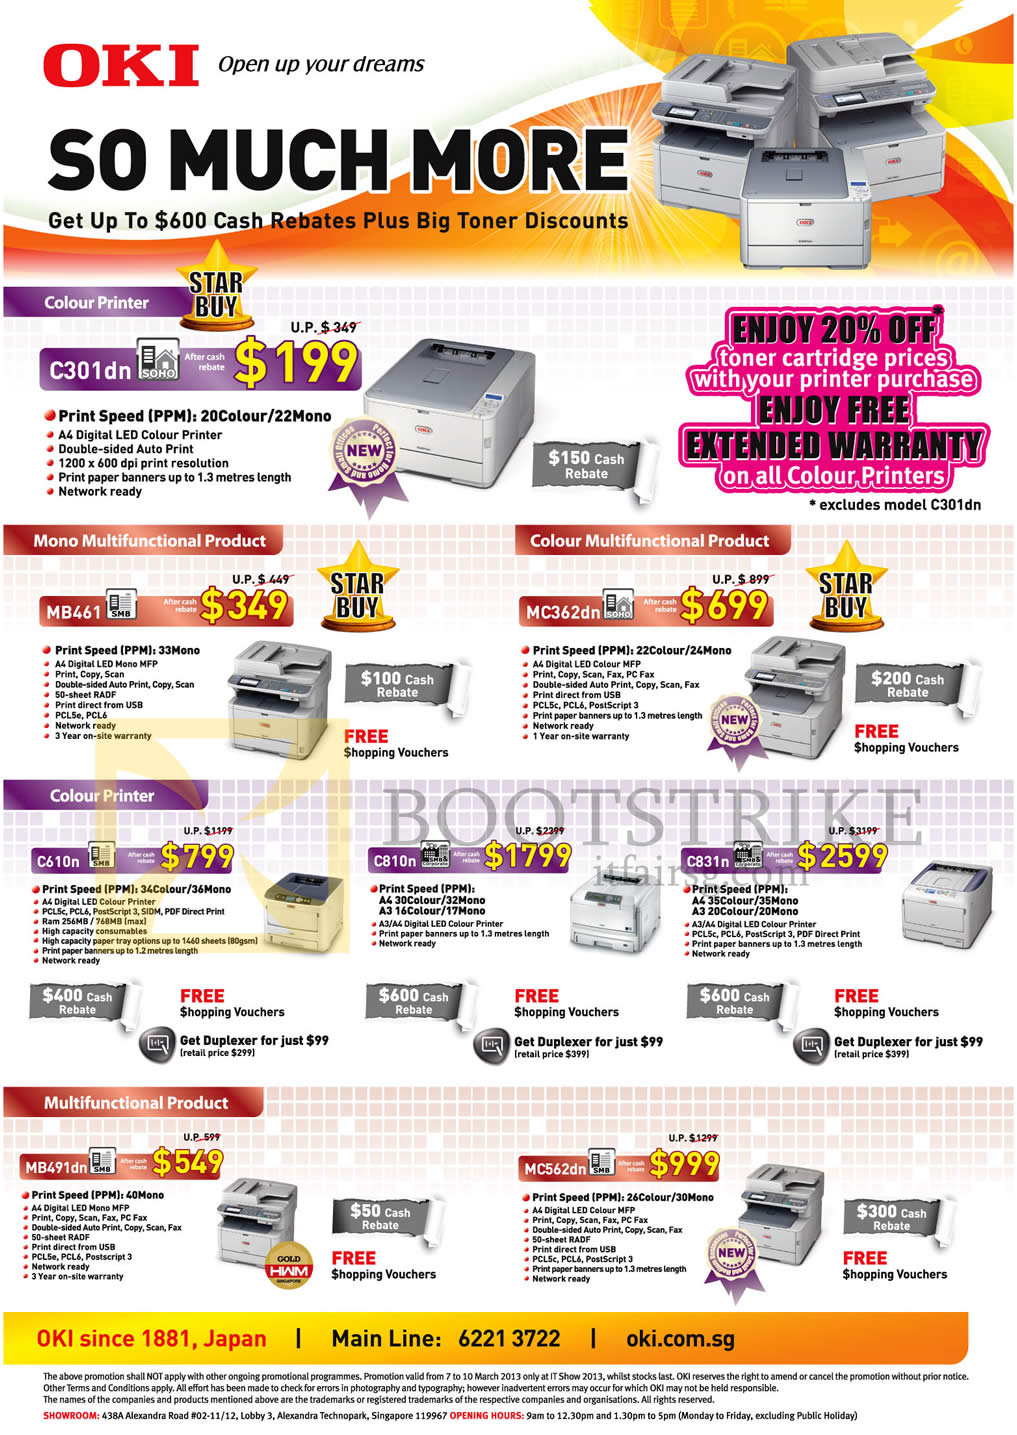 IT SHOW 2013 price list image brochure of Courts OKI Printers LED C301dn, MB461, MC362dn, C610n, C810n, C831n, MB491dn, MC562dn